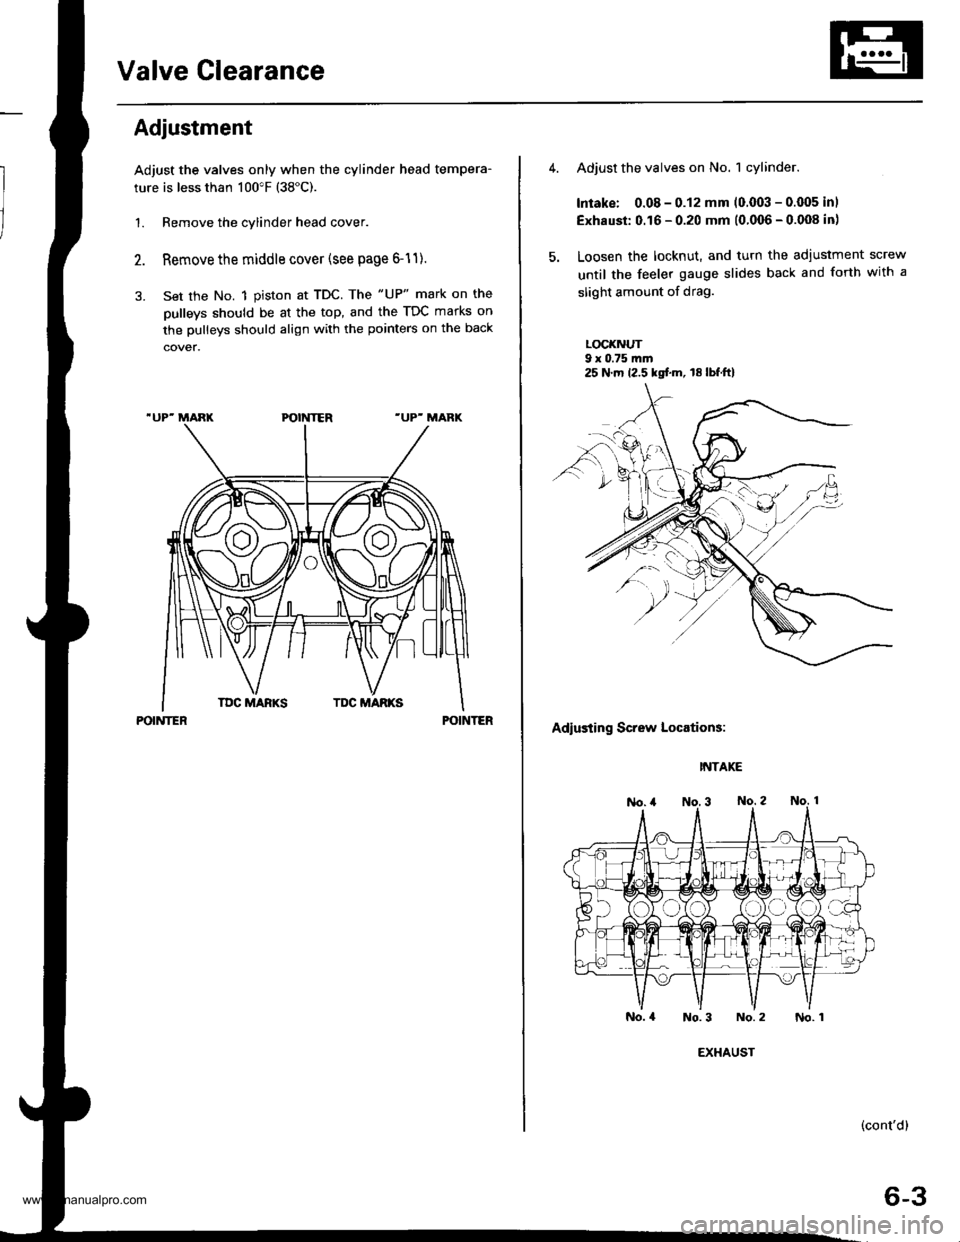 HONDA CR-V 1997 RD1-RD3 / 1.G Workshop Manual 
Valve Clearance
Adiustment
Adjust the valves only when the cylinder head tempera-
ture is less than 100"F (38"C).
1. Remove the cylinder head cover.
Remove the middle cover (see page 6-11).
Set the N